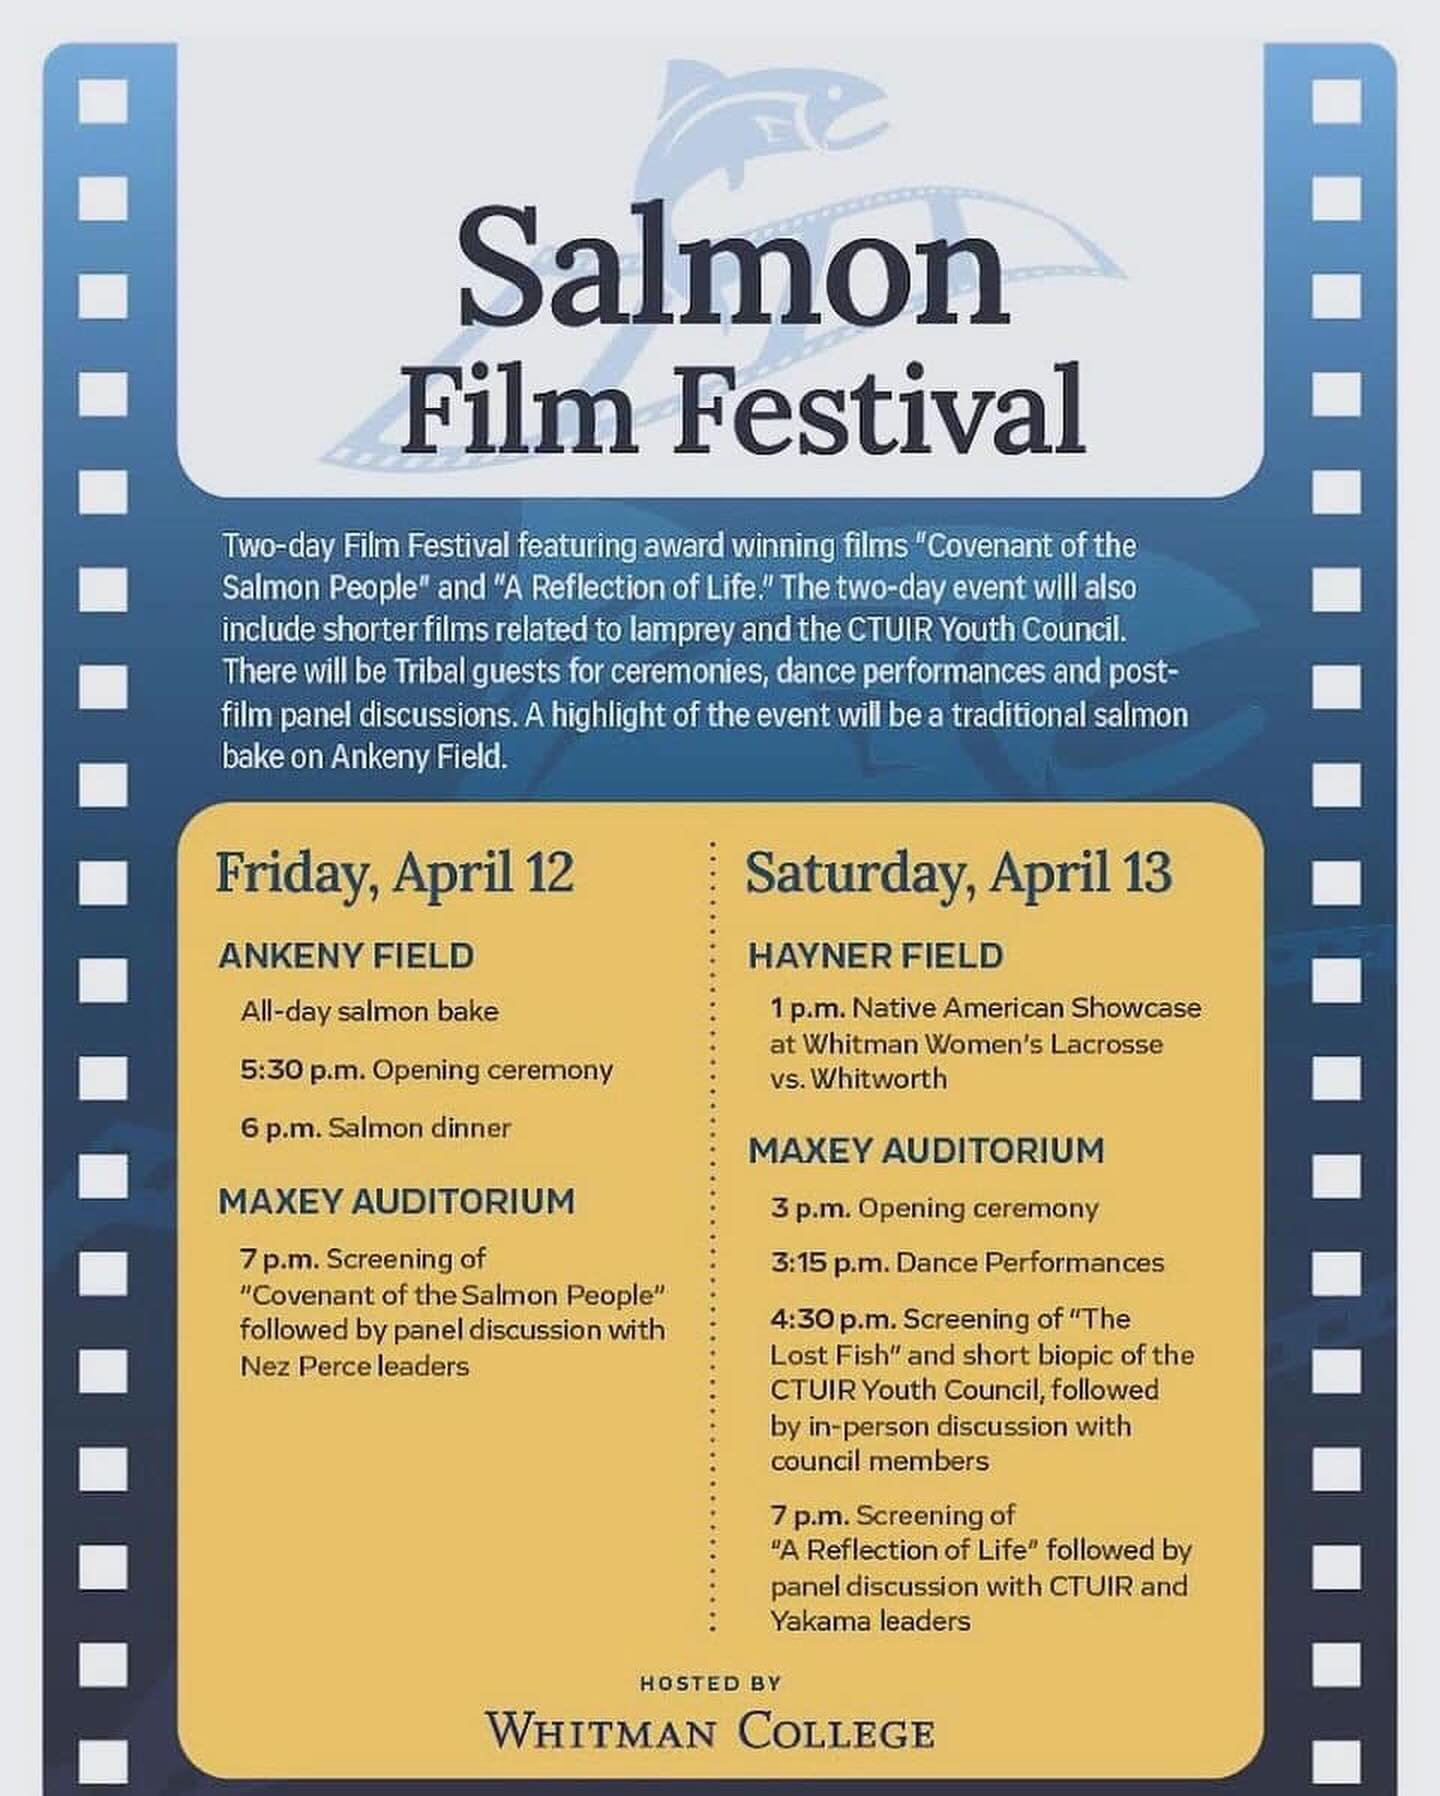 Repost from @acosia_
&bull;
Inviting you all out to the Salmon Film Festival this weekend in Walla Walla Washington Whitman College .

Our Film &ldquo;A Reflection of Life&rdquo; will be screening Saturday evening 7pm , a Panel discussion with Donald